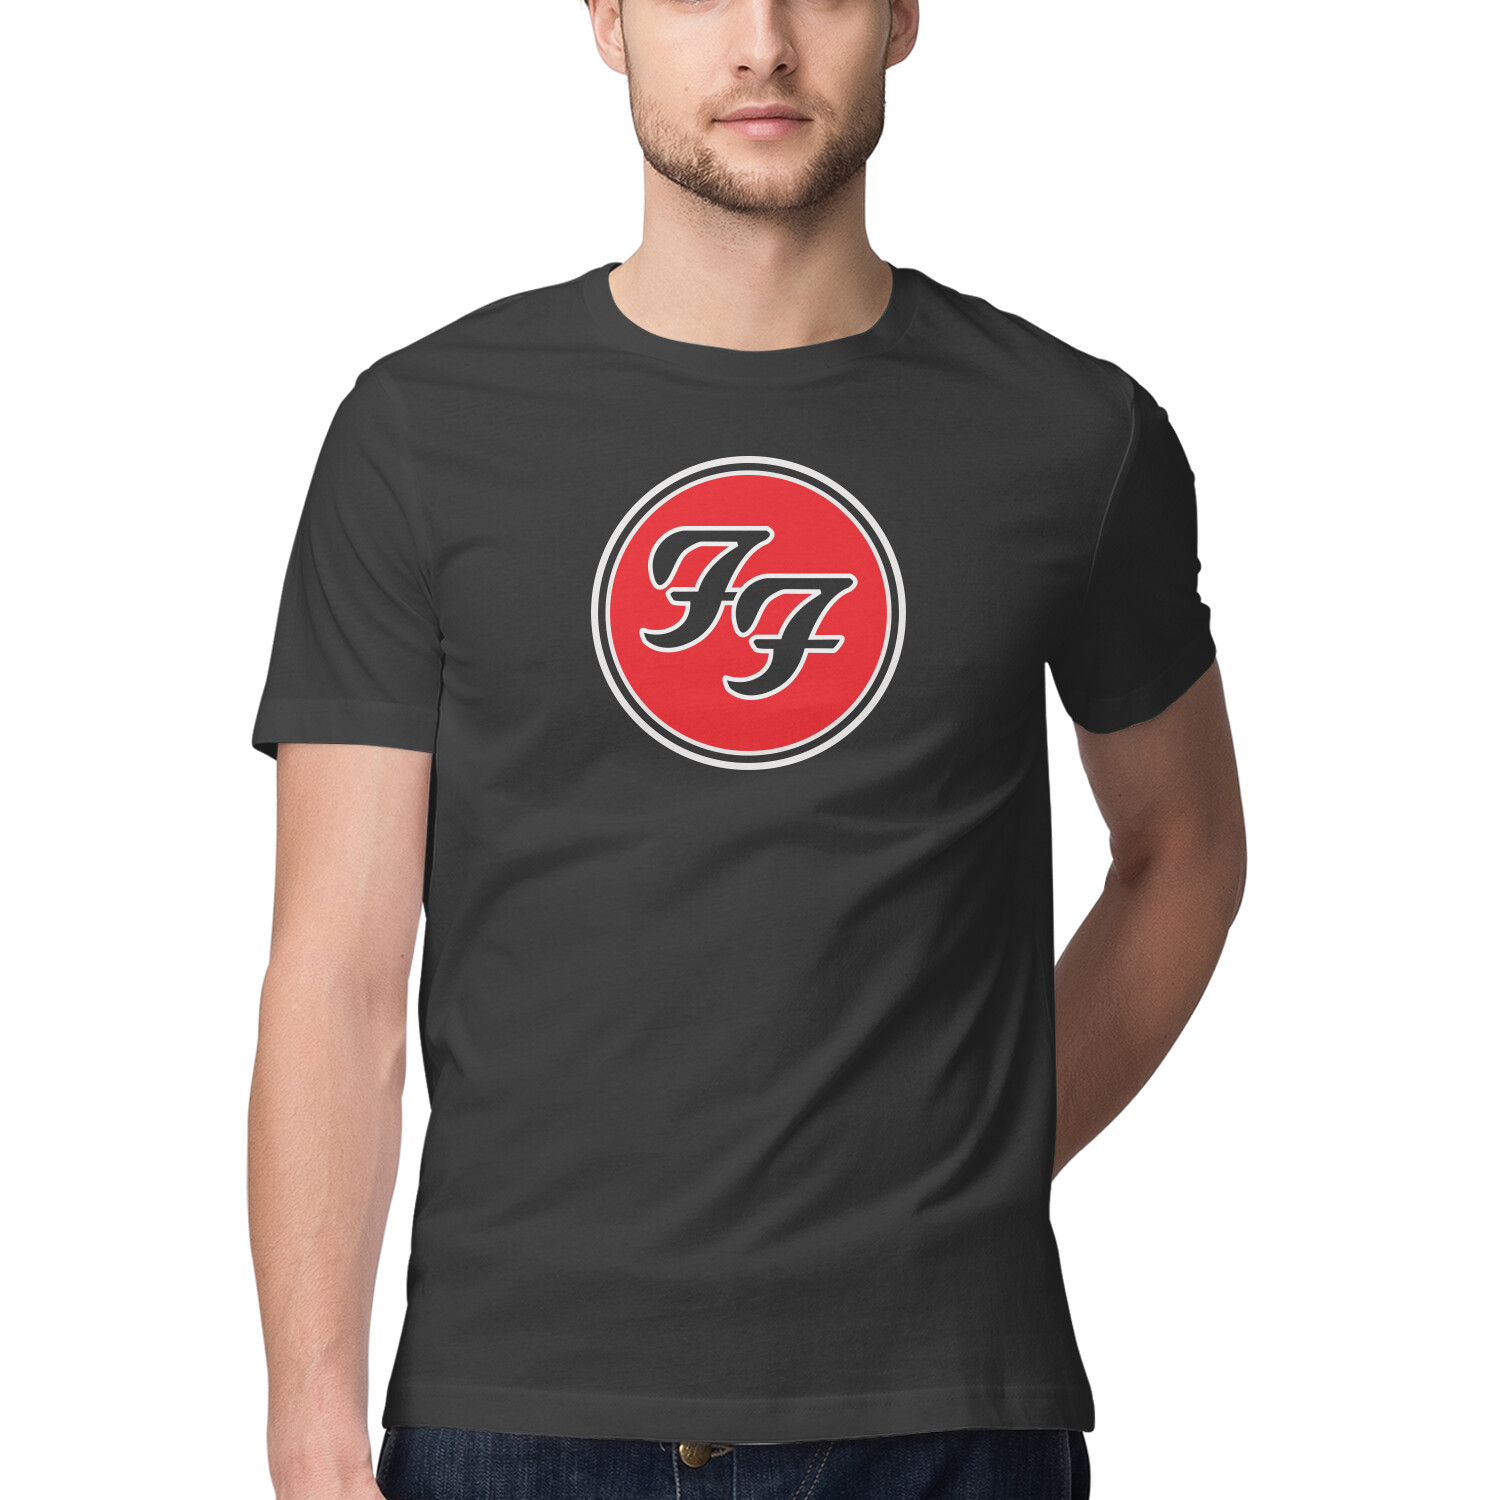 Foo Fighters Band T-Shirt for Men and Women in India - Manmarzee